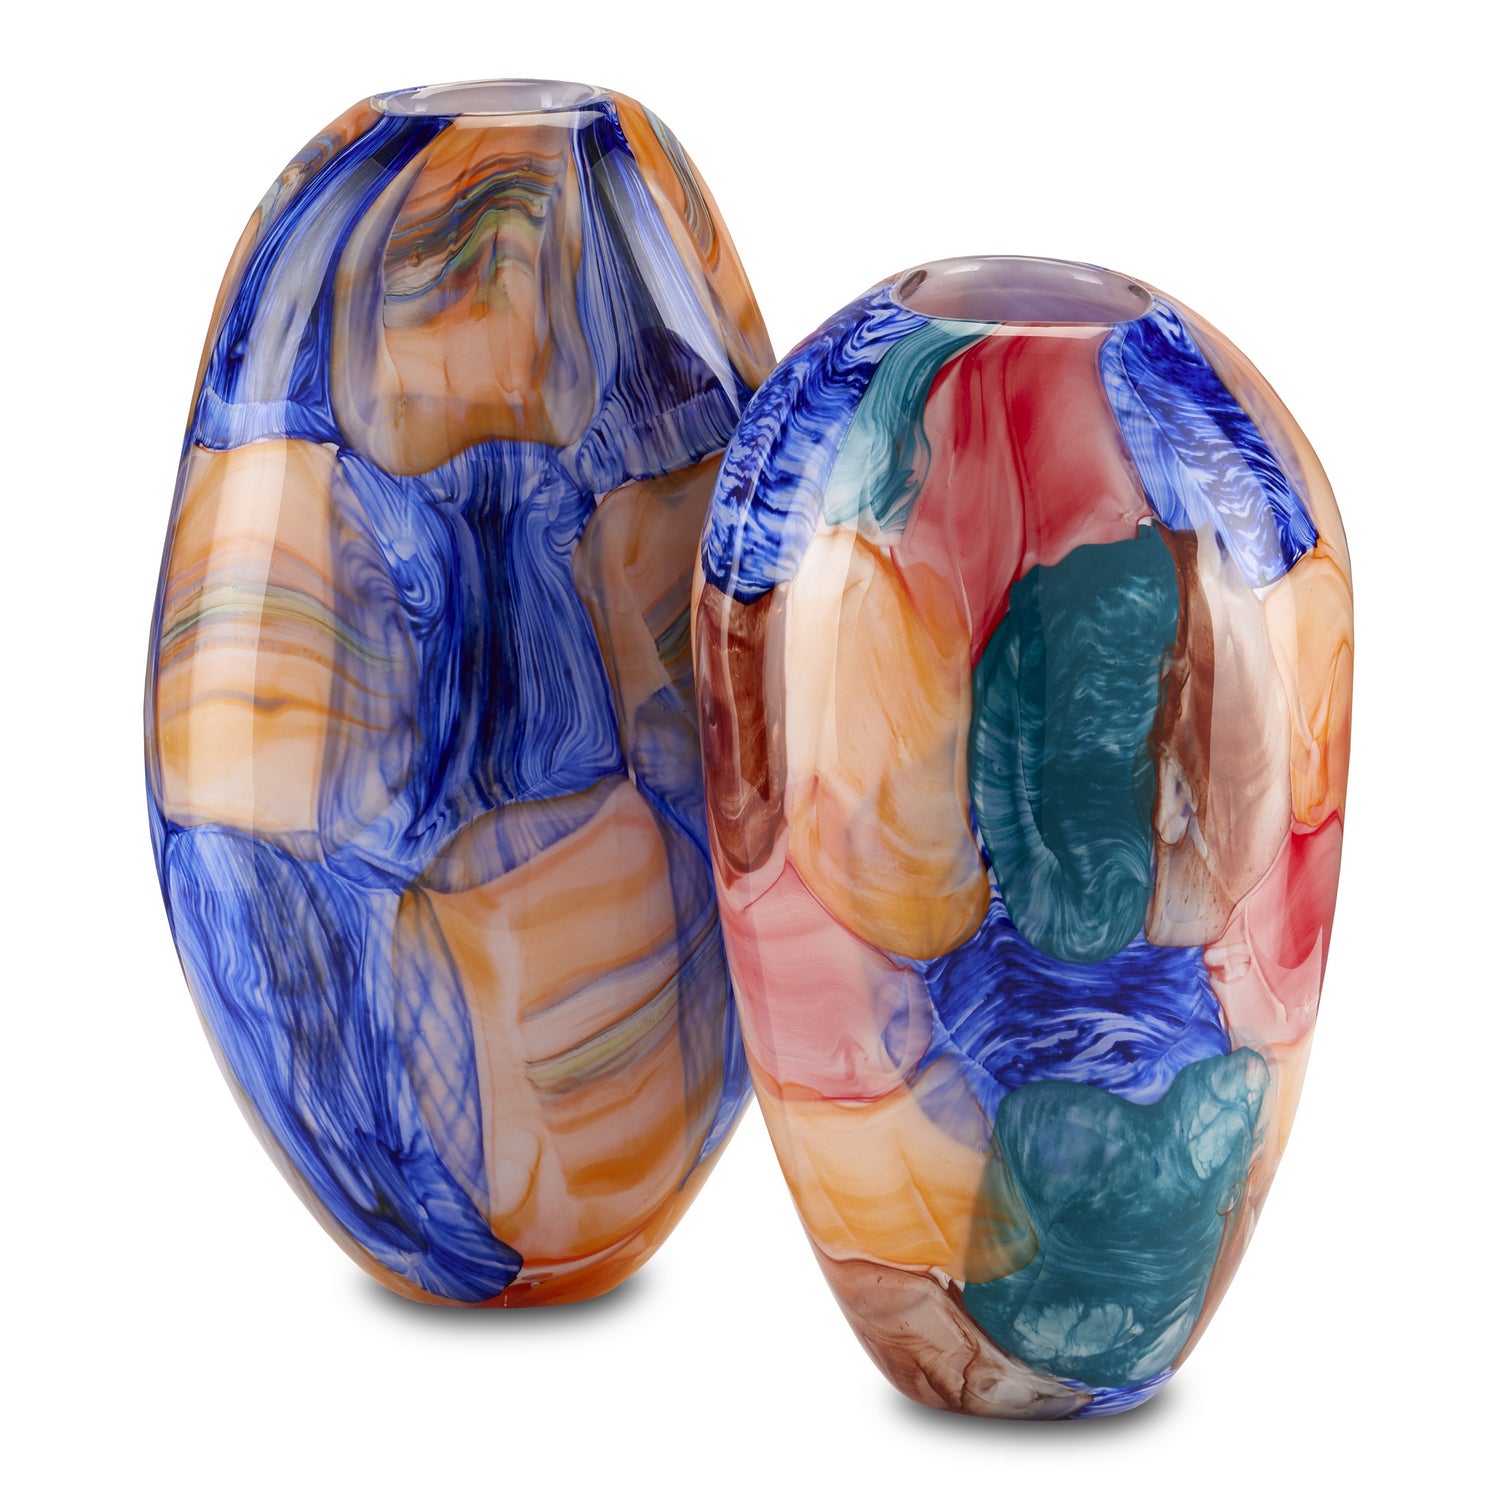 Vase from the Sarto collection in Blue/Orange/Green finish